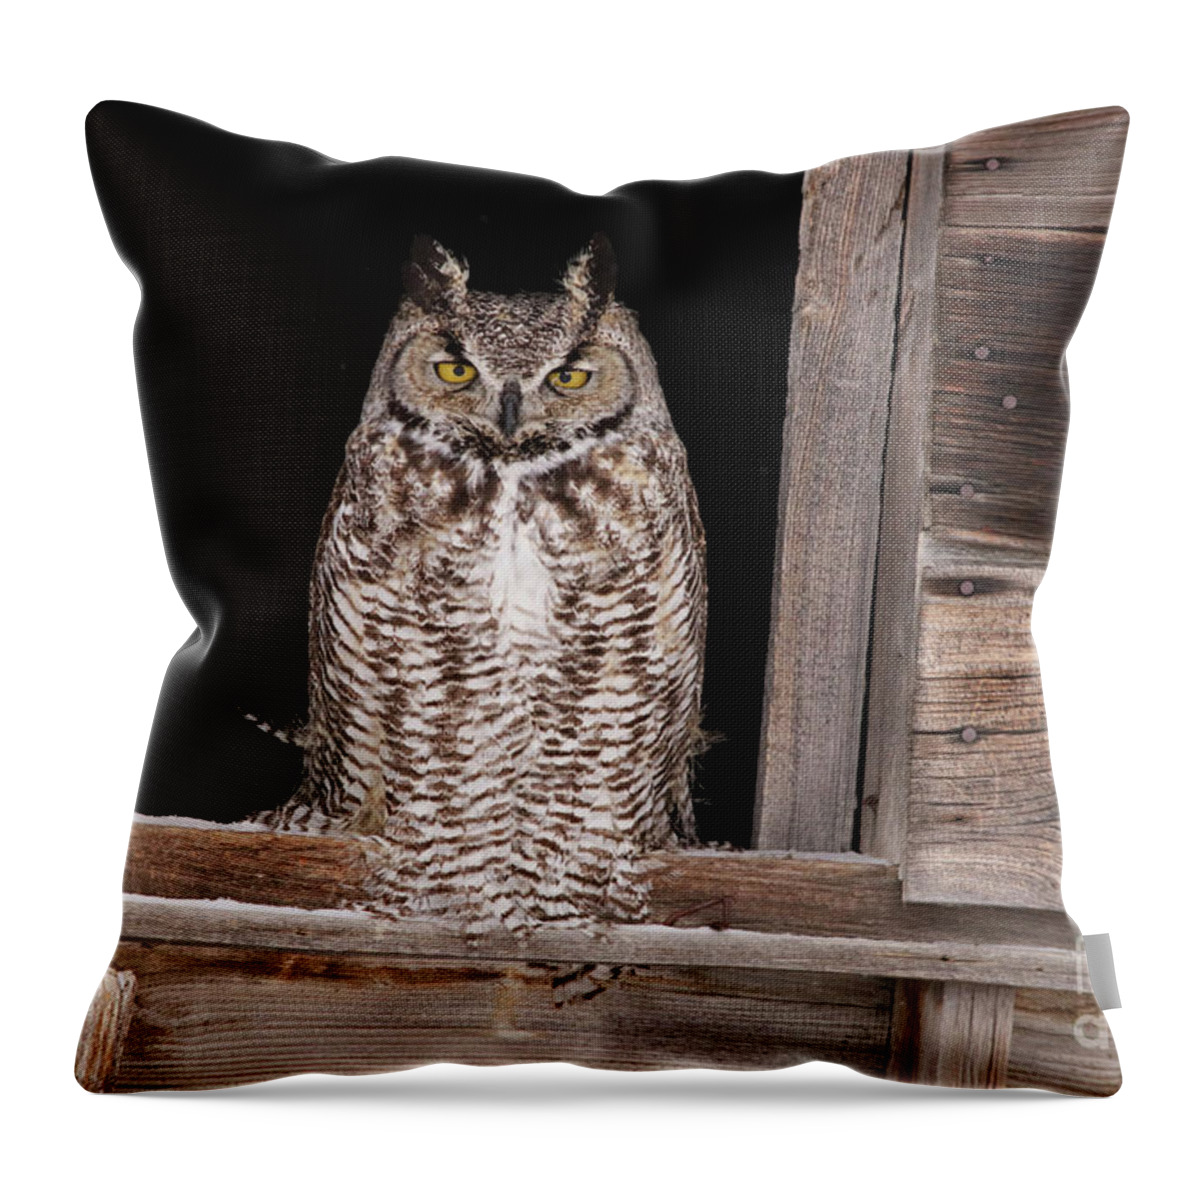 Owl Throw Pillow featuring the photograph Window Sitting by Alyce Taylor